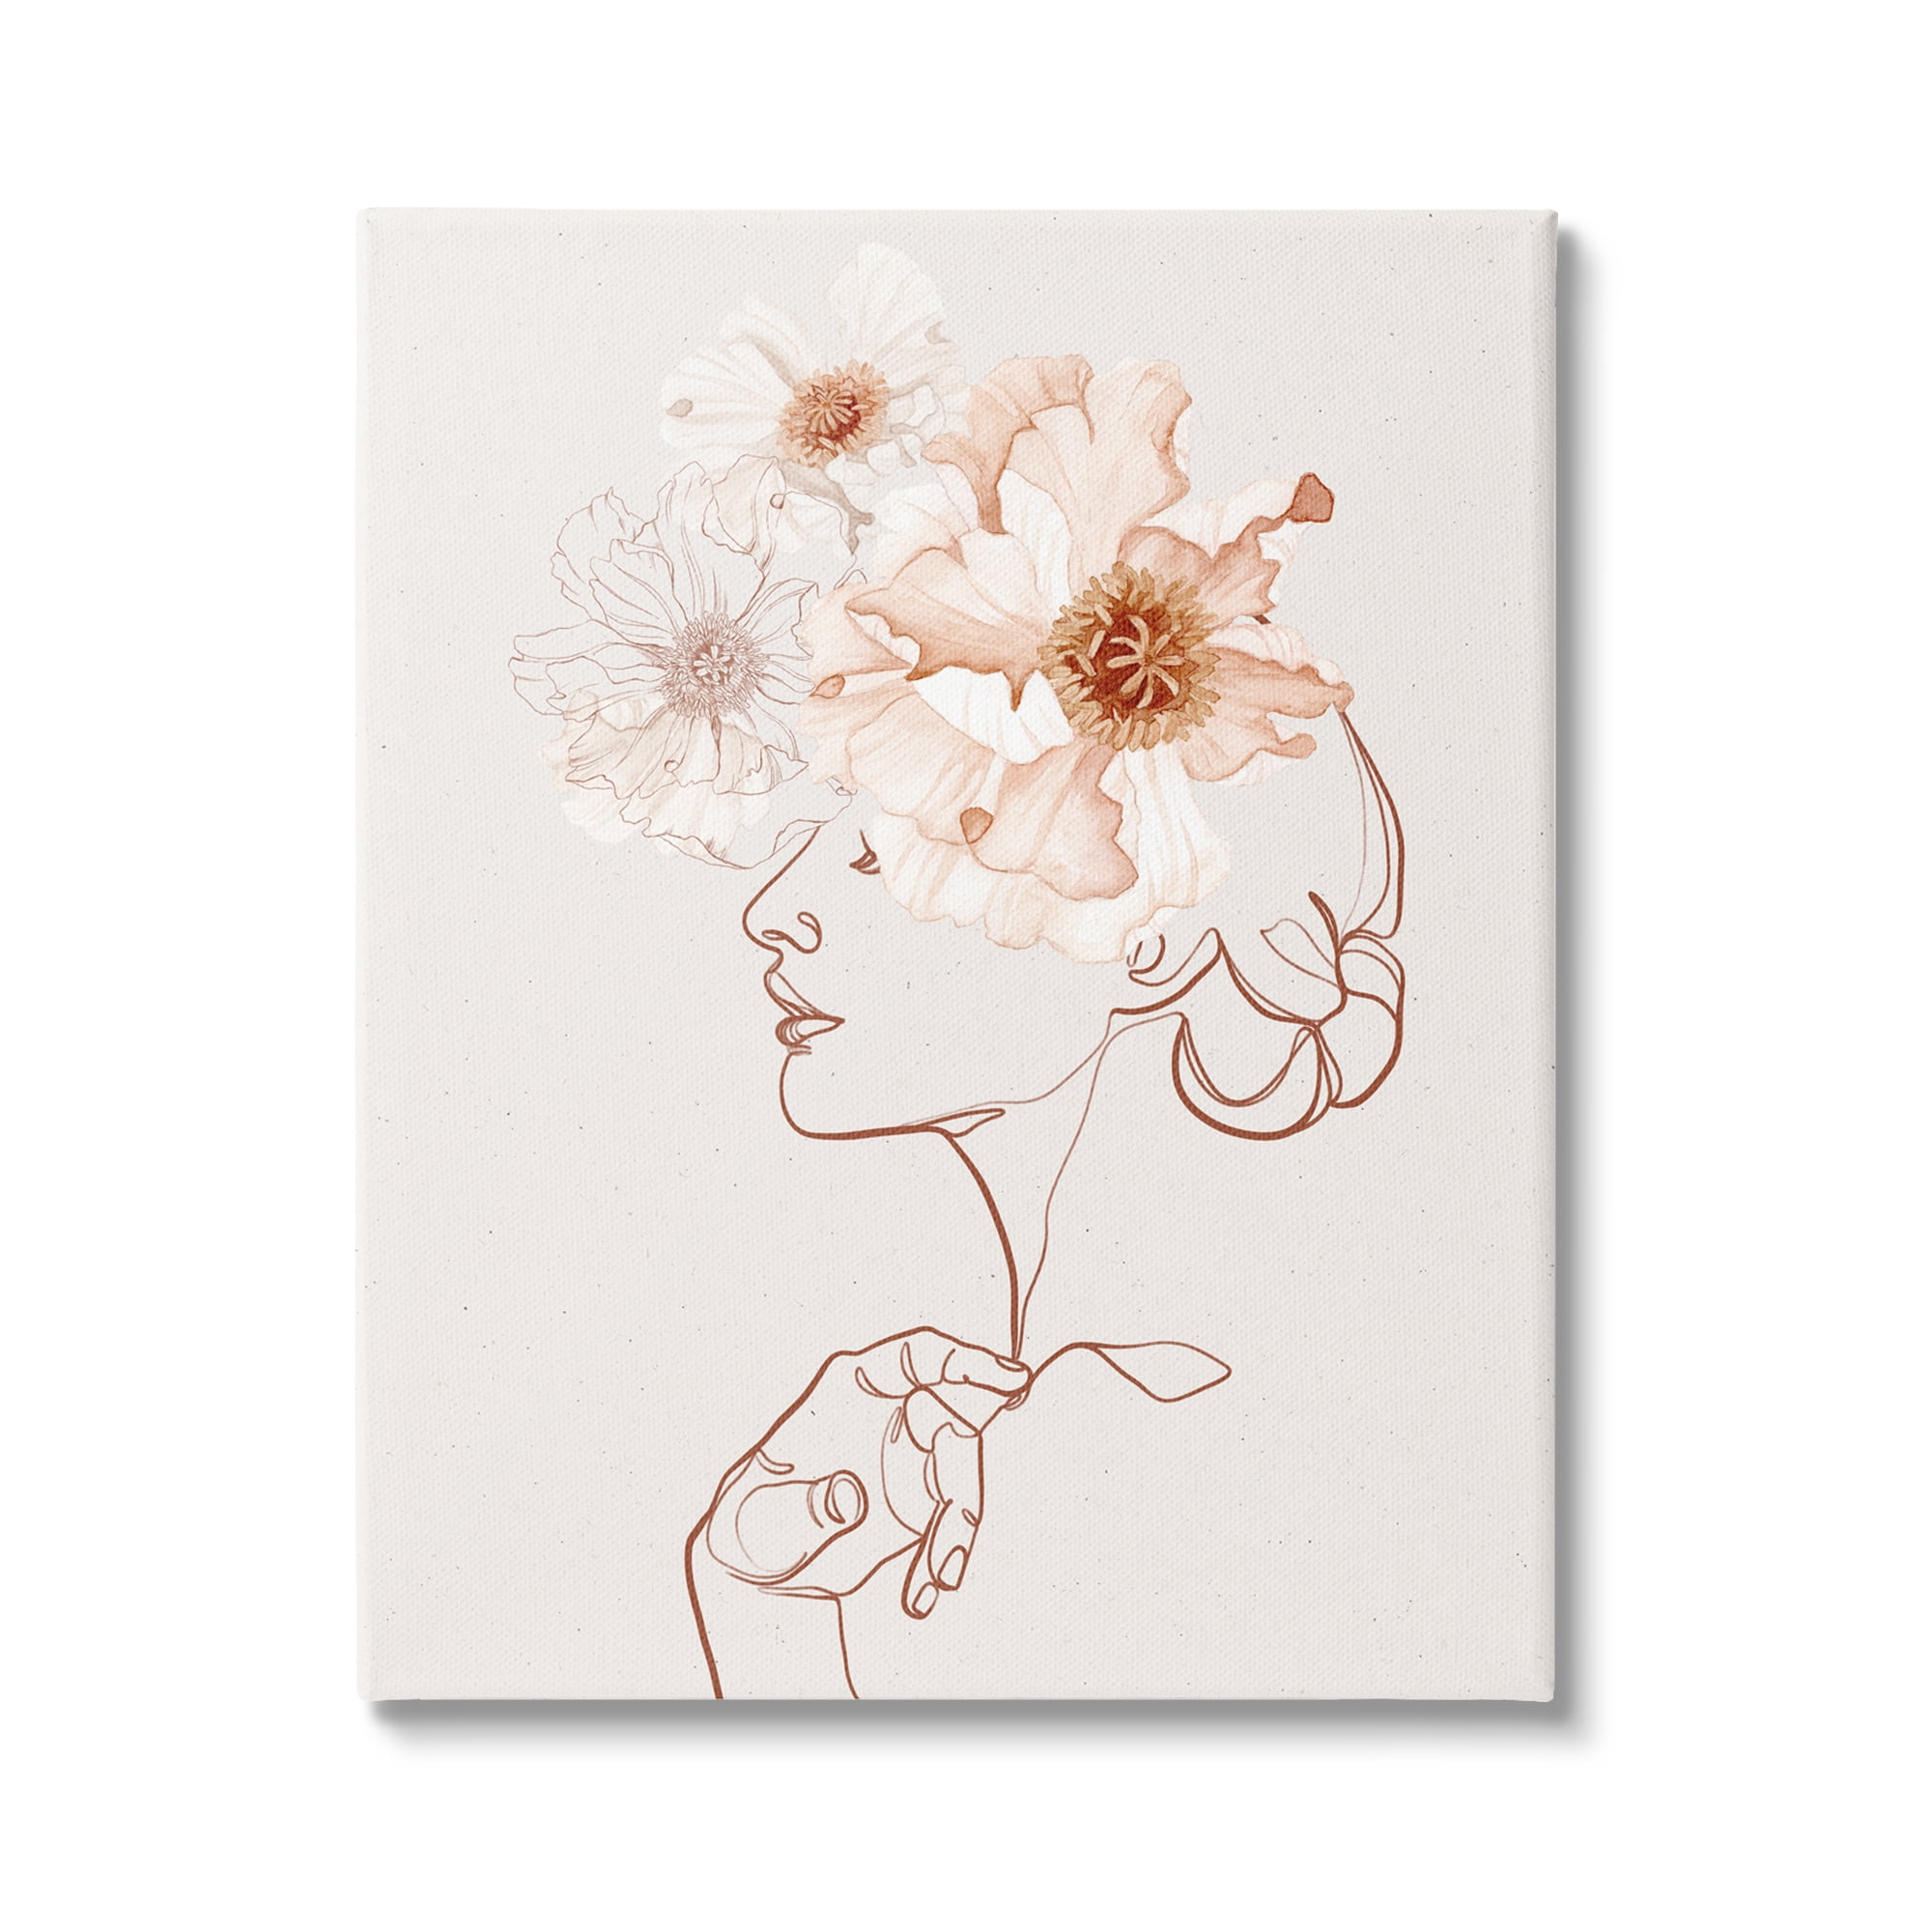 The Stupell Home Decor Collection Fashion Bookstack Purse Perfume Pink Glam  Design by Ziwei Li Floater Frame Nature Wall Art Print 31 in. x 25 in.  aa-377_ffl_24x30 - The Home Depot